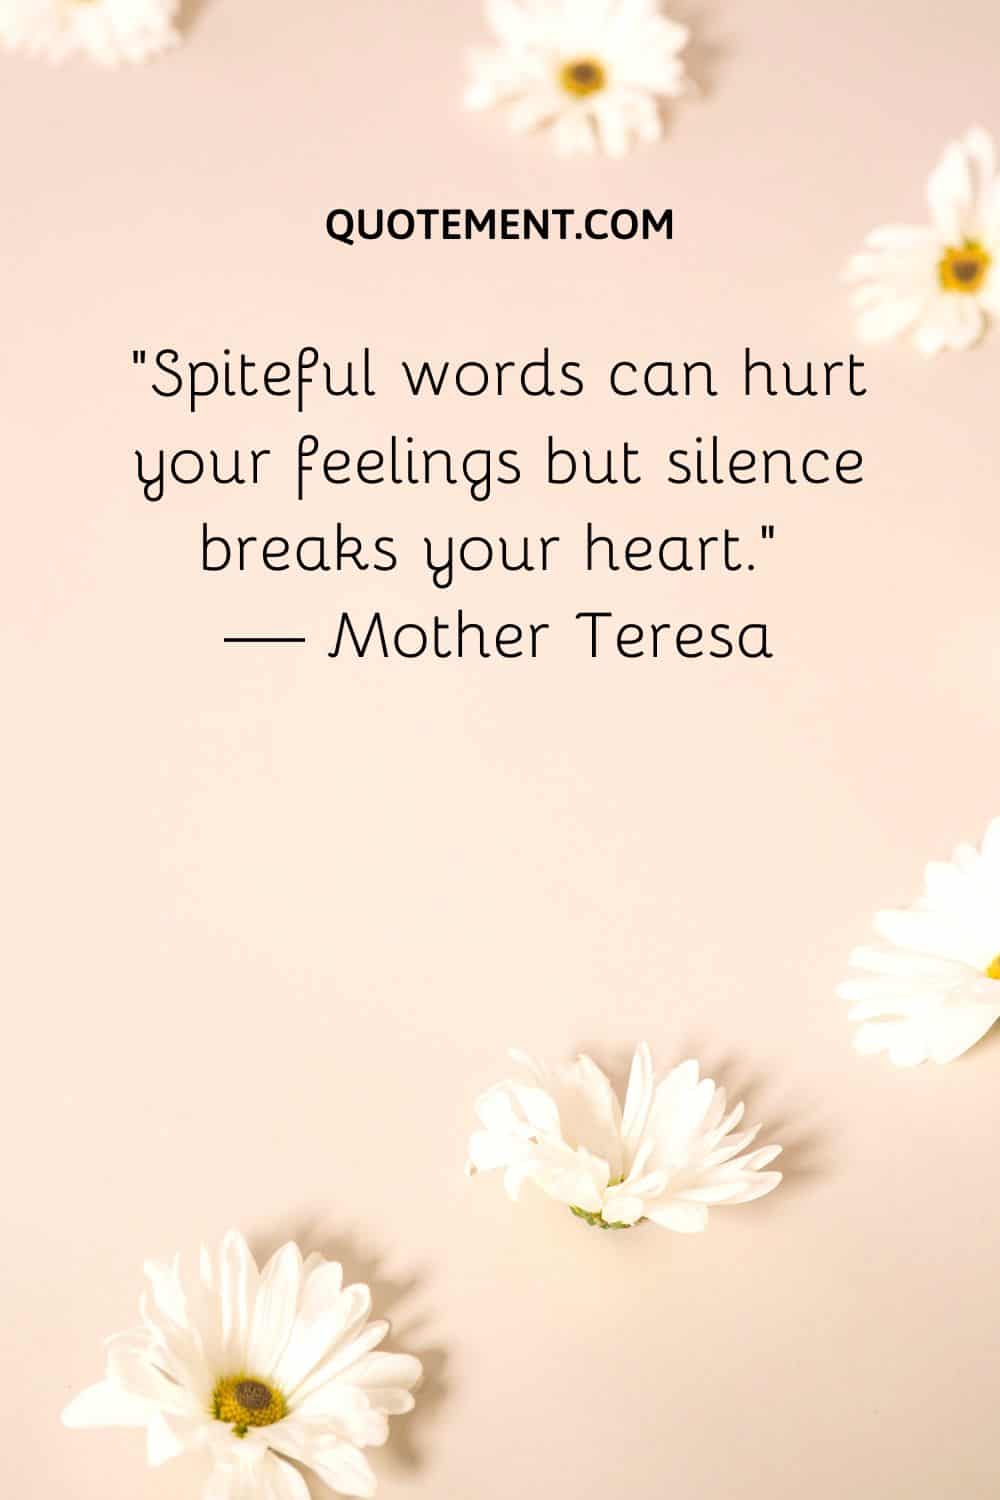 Spiteful words can hurt your feelings but silence breaks your heart